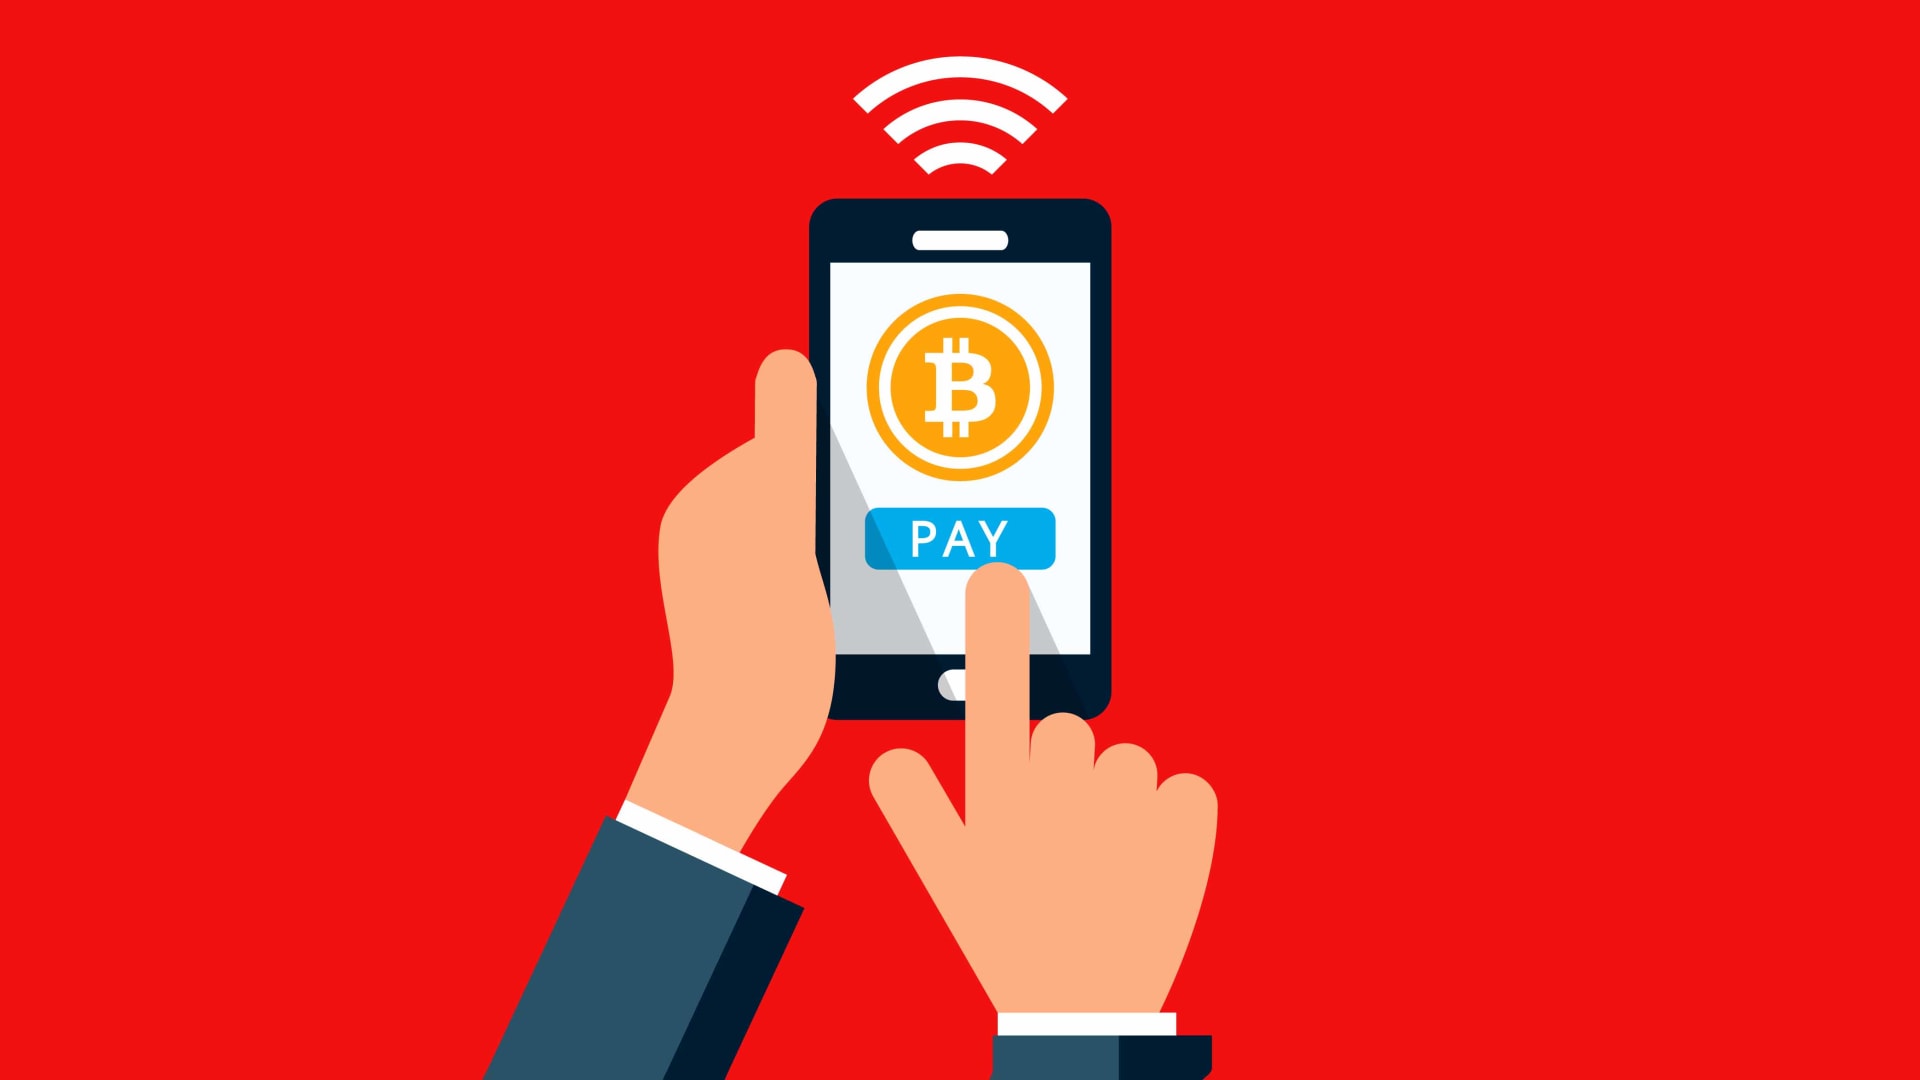 What You Need to Know Before Accepting Bitcoin Payments